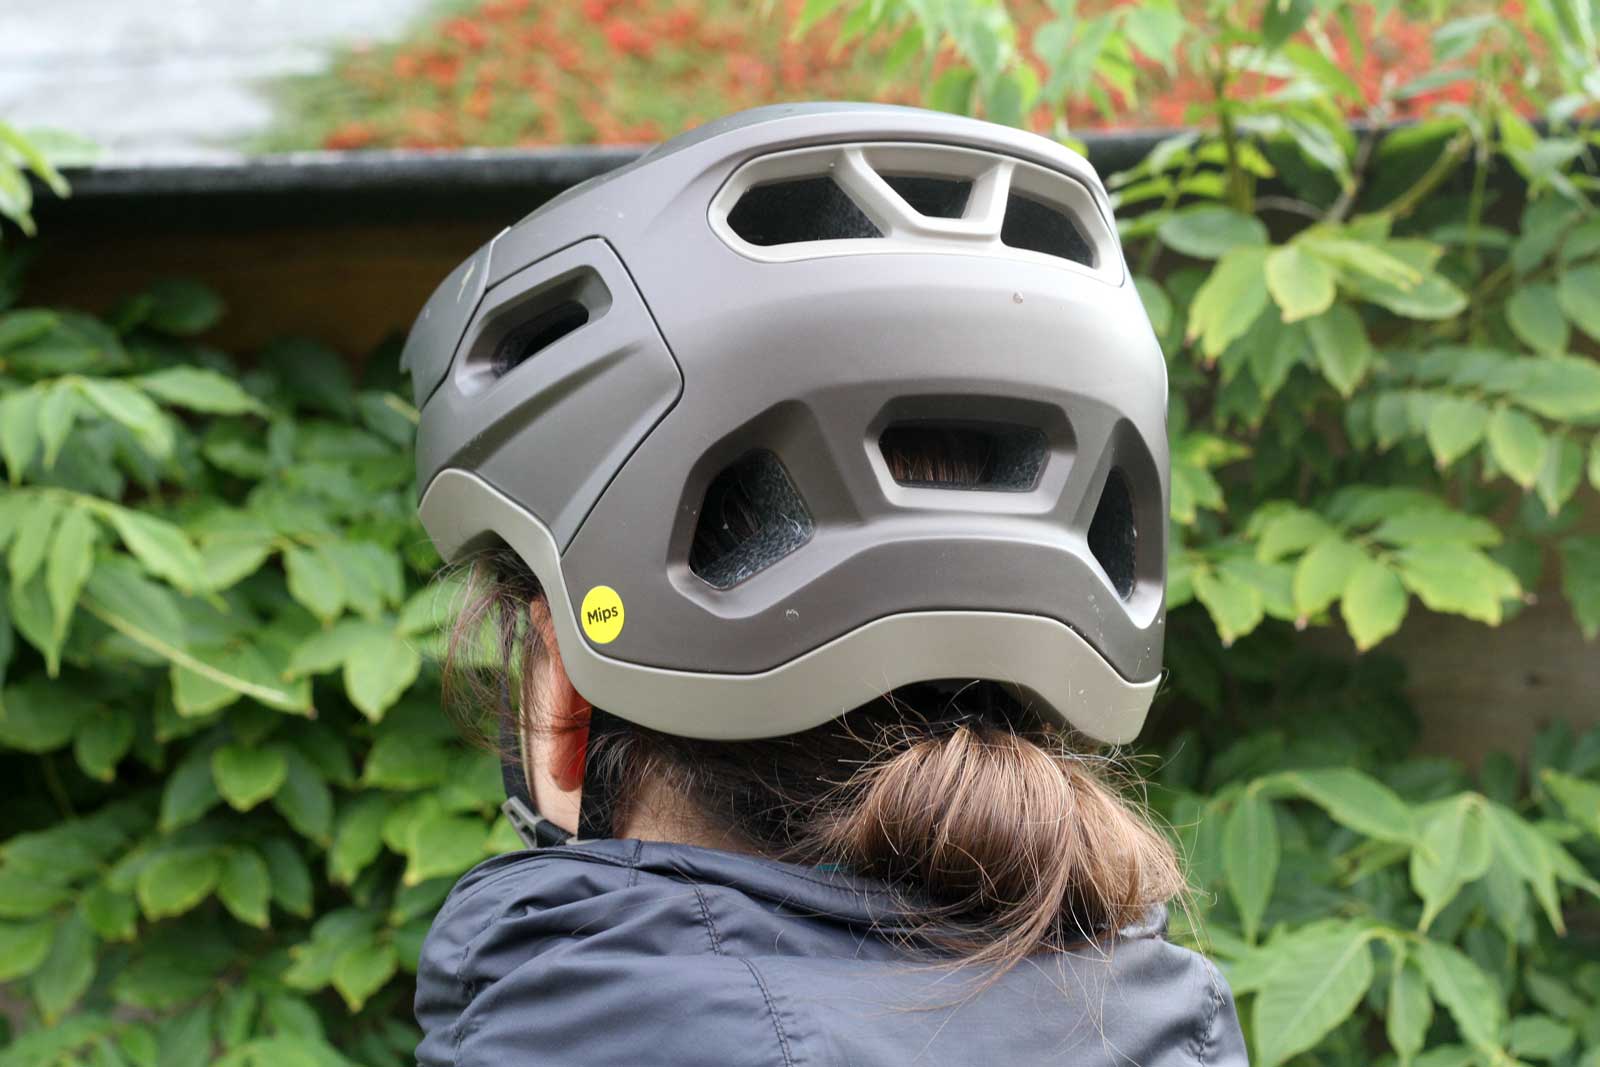 specialized tactic 4 helmet review extended rear coverage